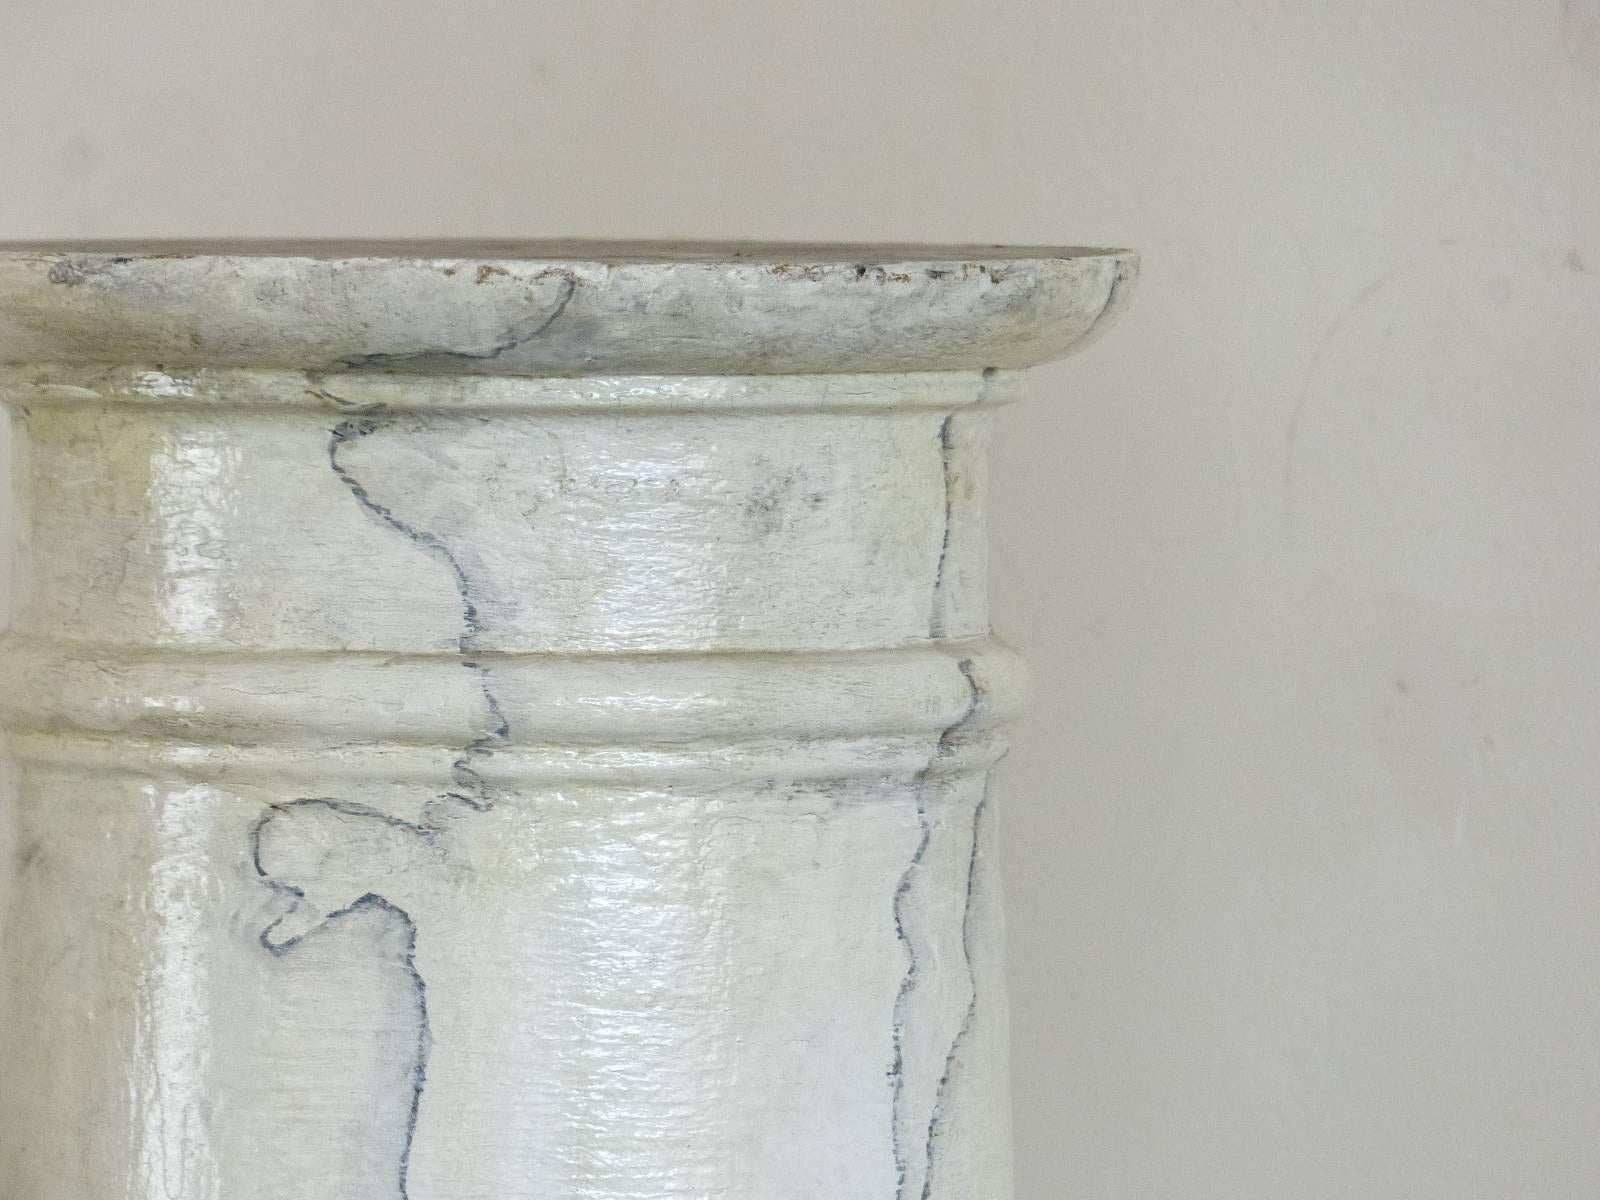 Set of two wooden columns salvaged from a site in Ontario. These wooden accent pieces are complete with caps and bases and are in a faux marble grain paint. The surface is age cracked showing excellent texture.